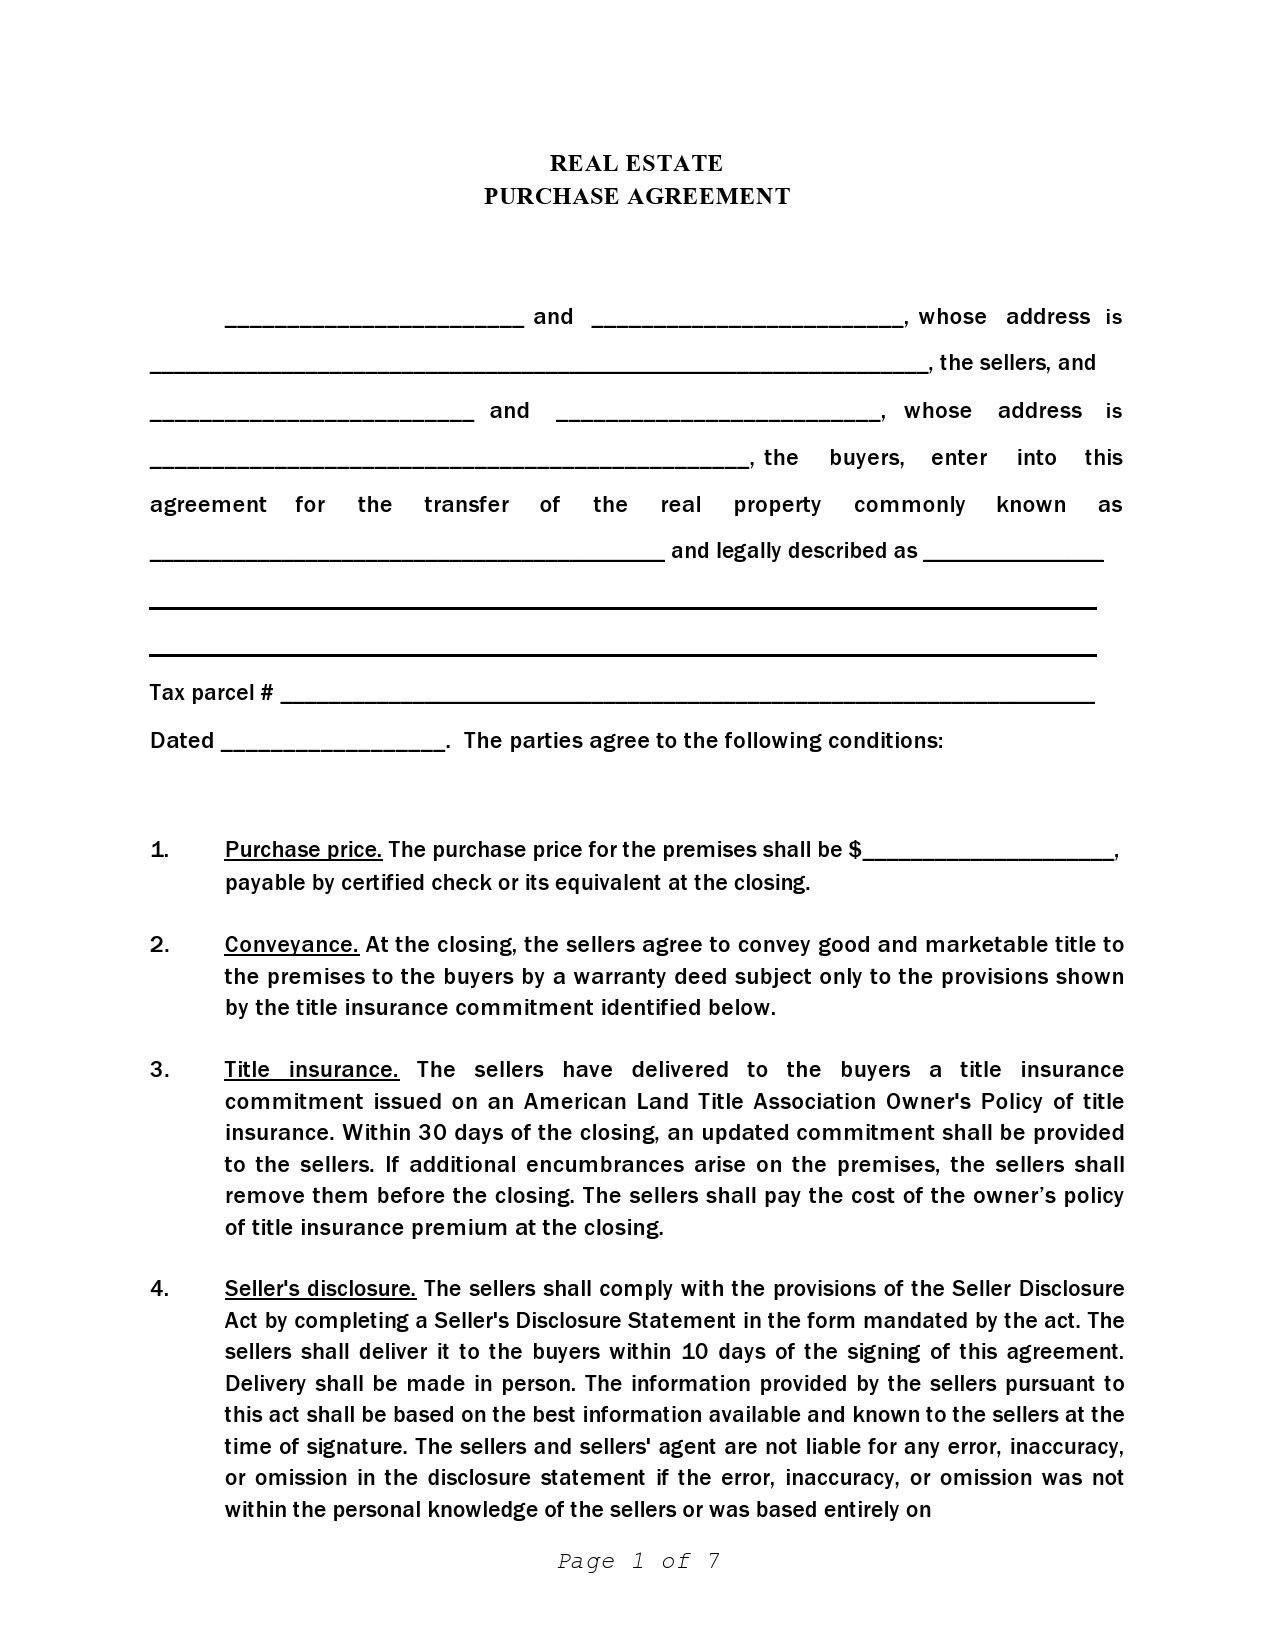 Free real estate purchase agreement 39